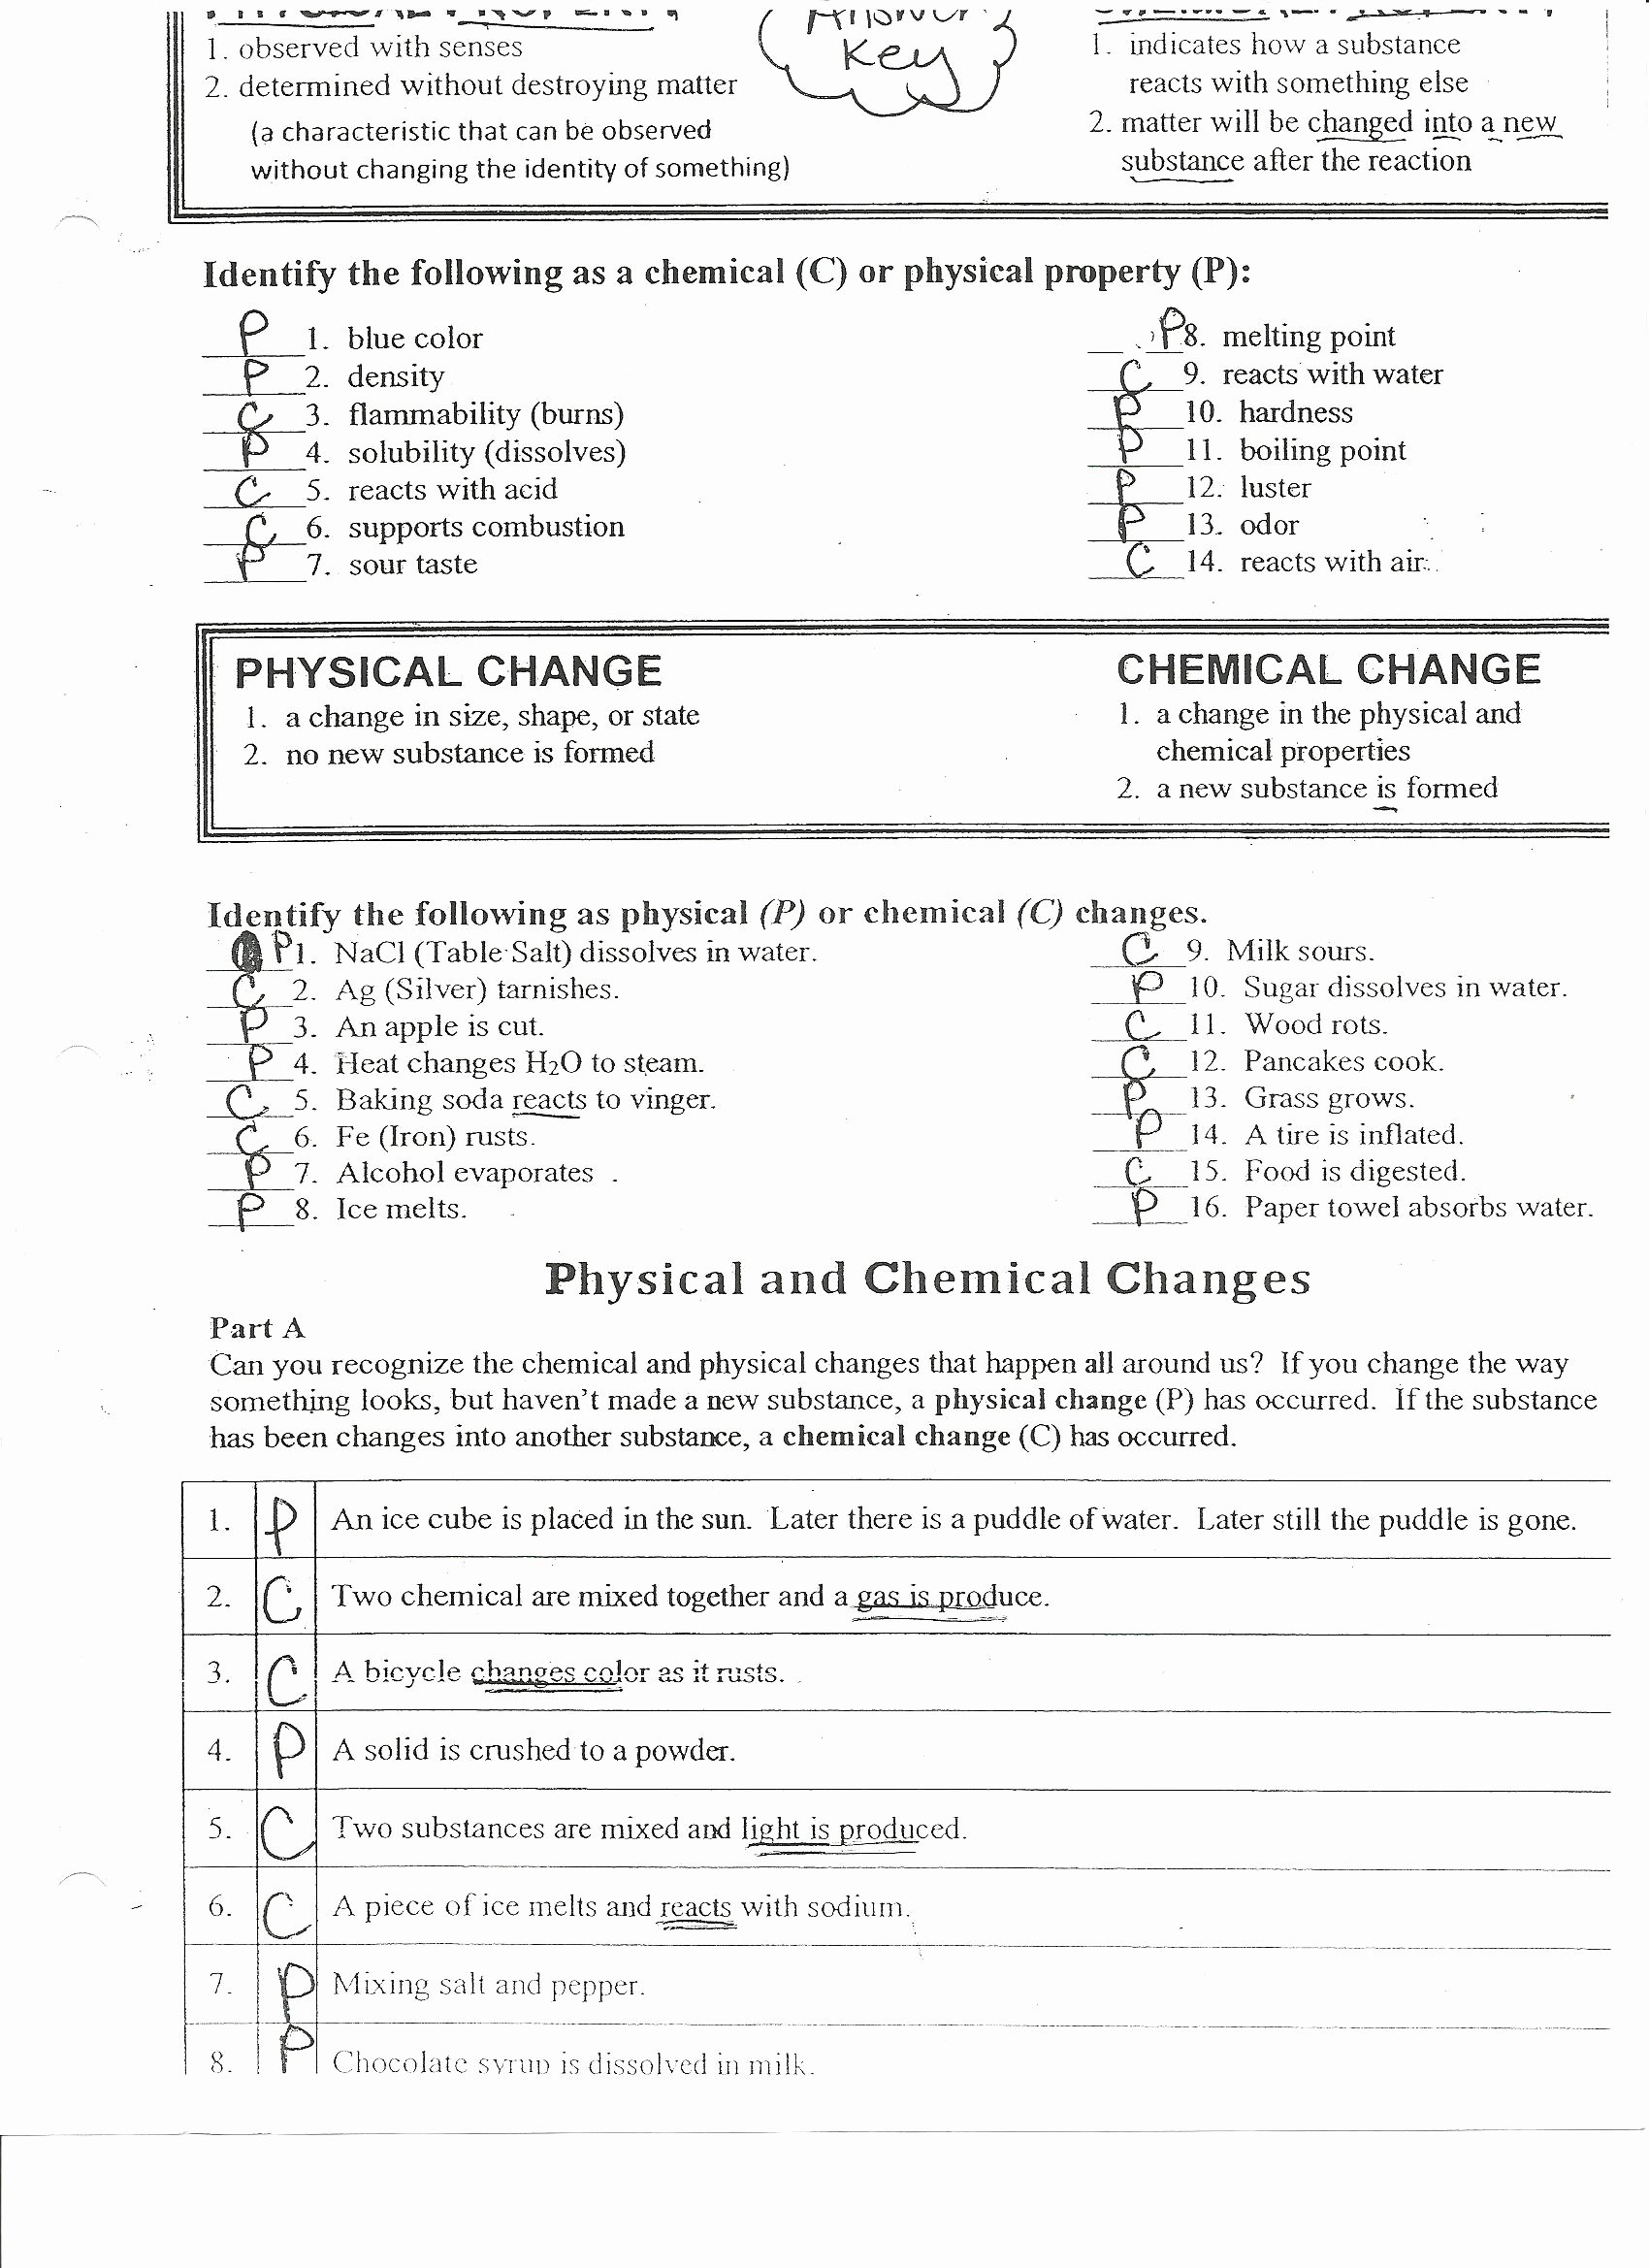 Physical and Chemical Change Worksheet Beautiful Chemistry Worksheets for Grade 9